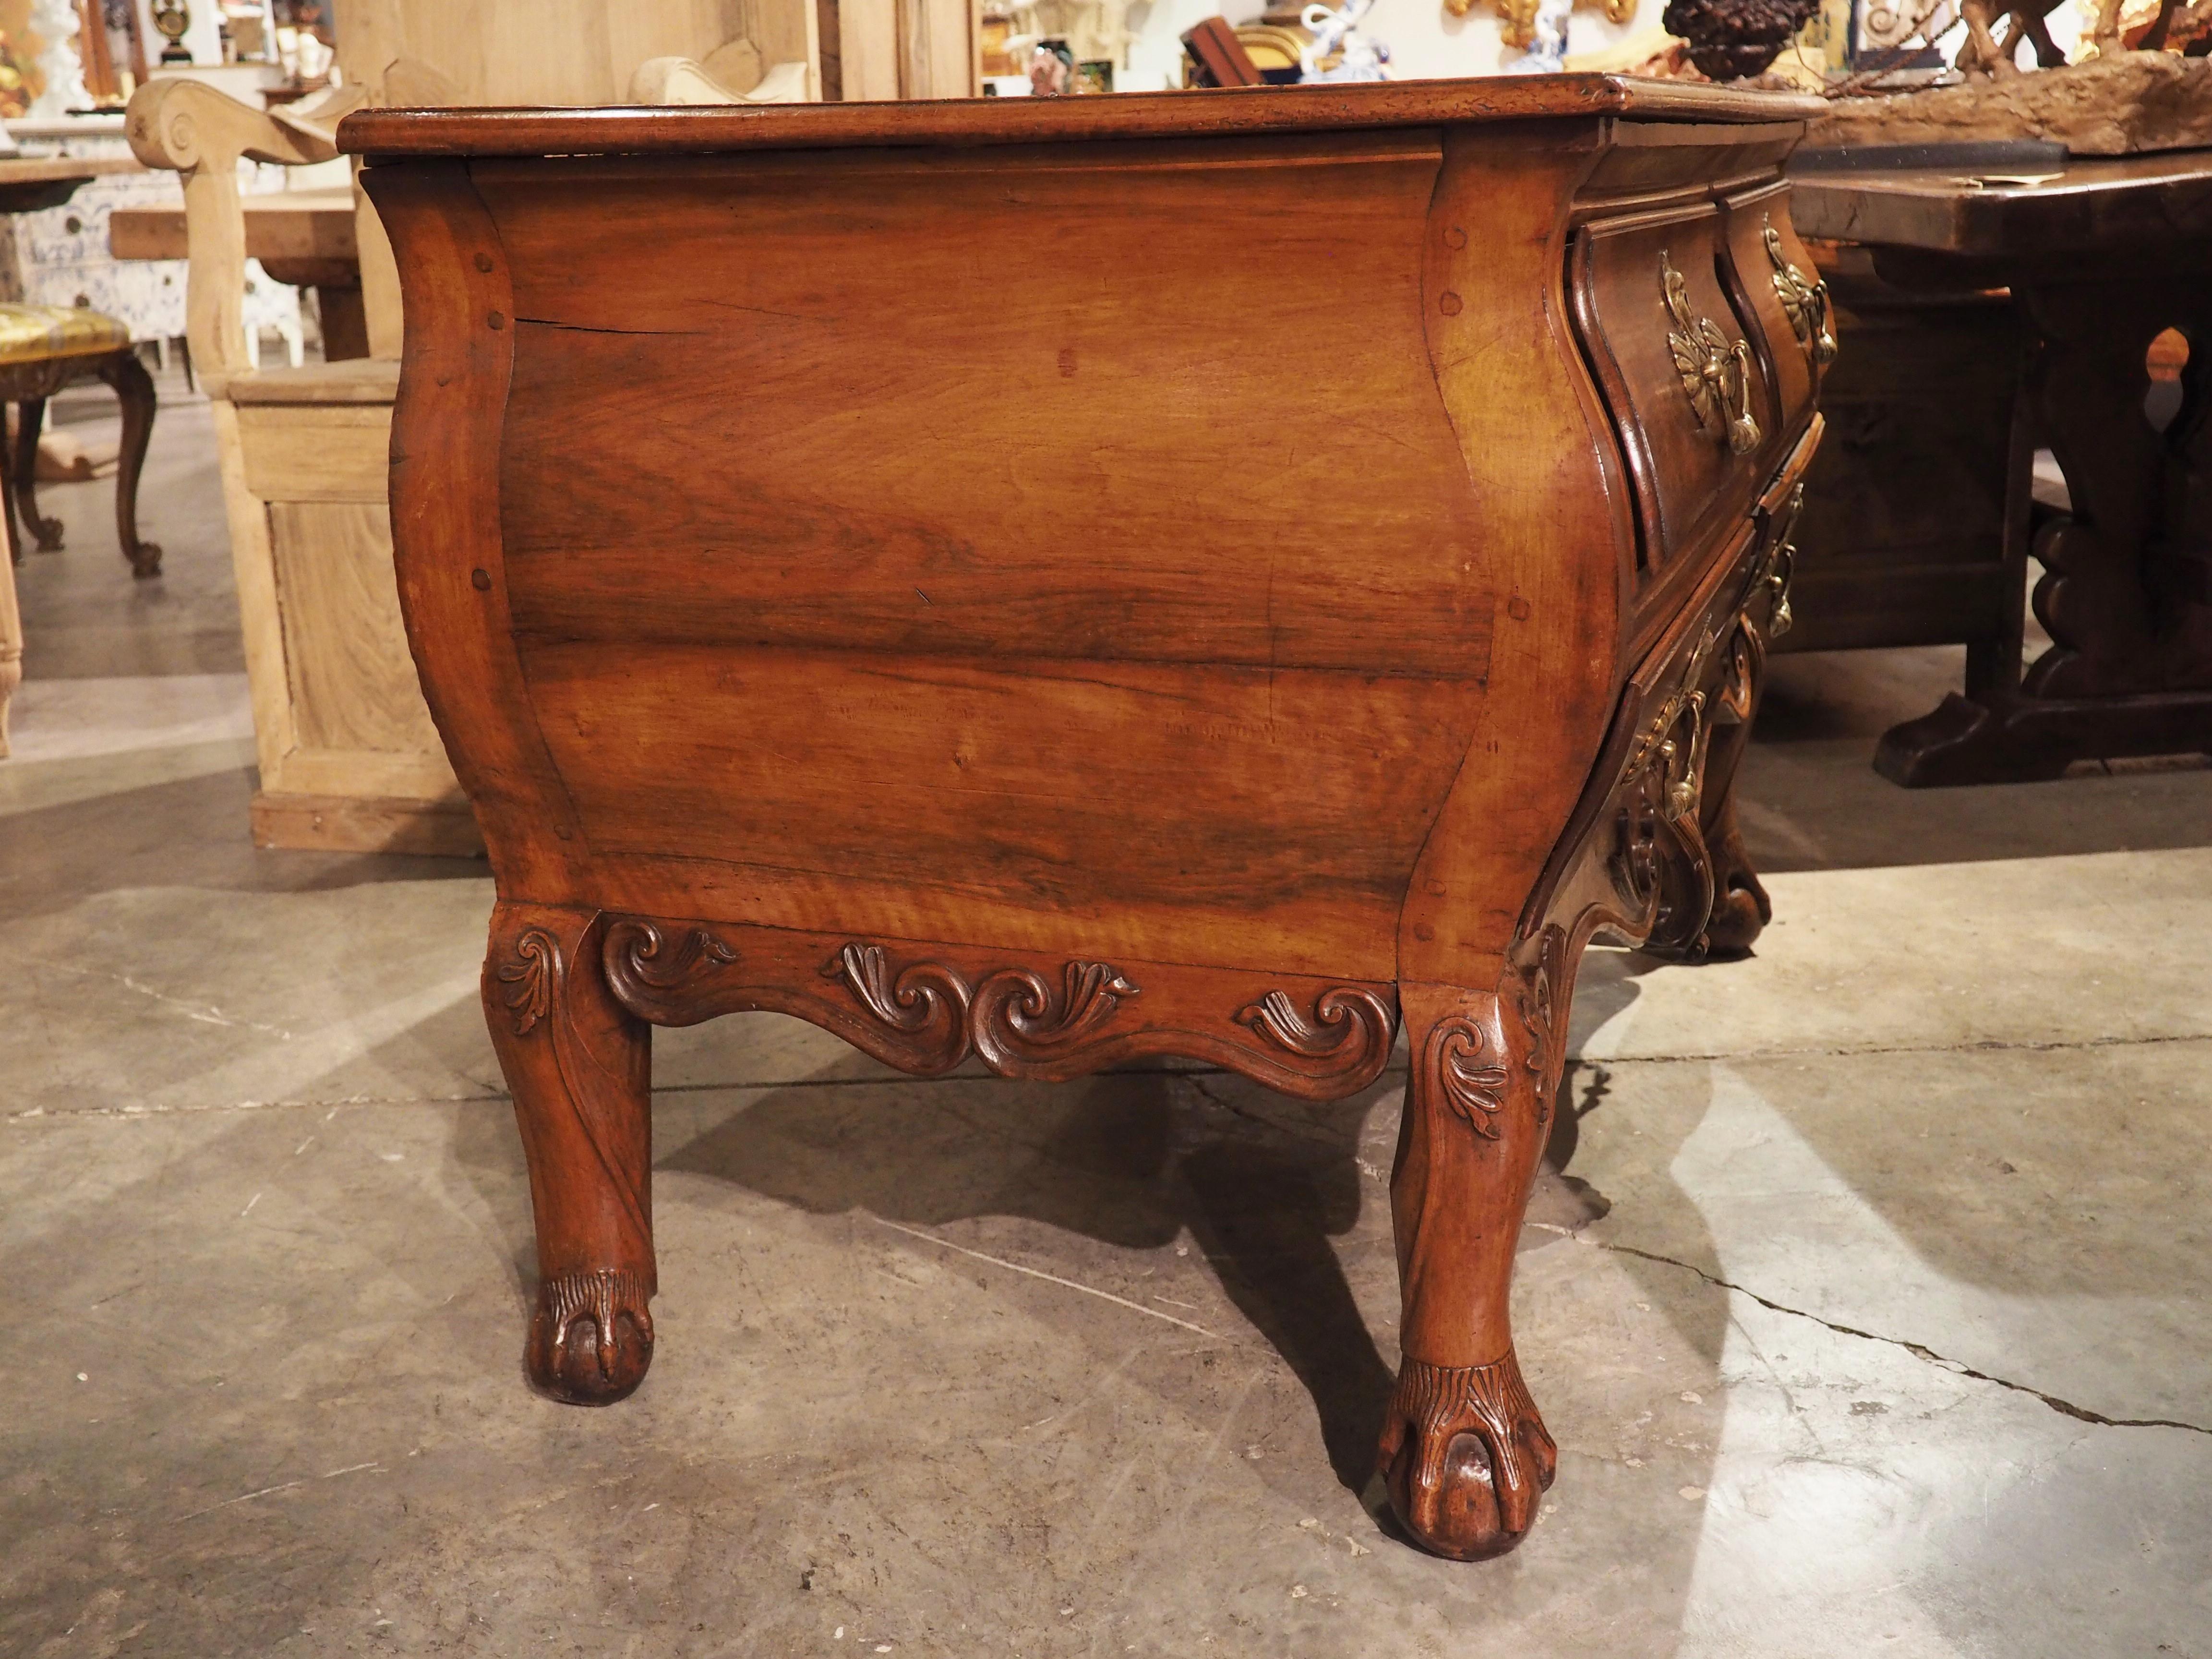 Rare 18th Century French Walnut Commode “Angouleme” with Stamped Bronze Hardware For Sale 7